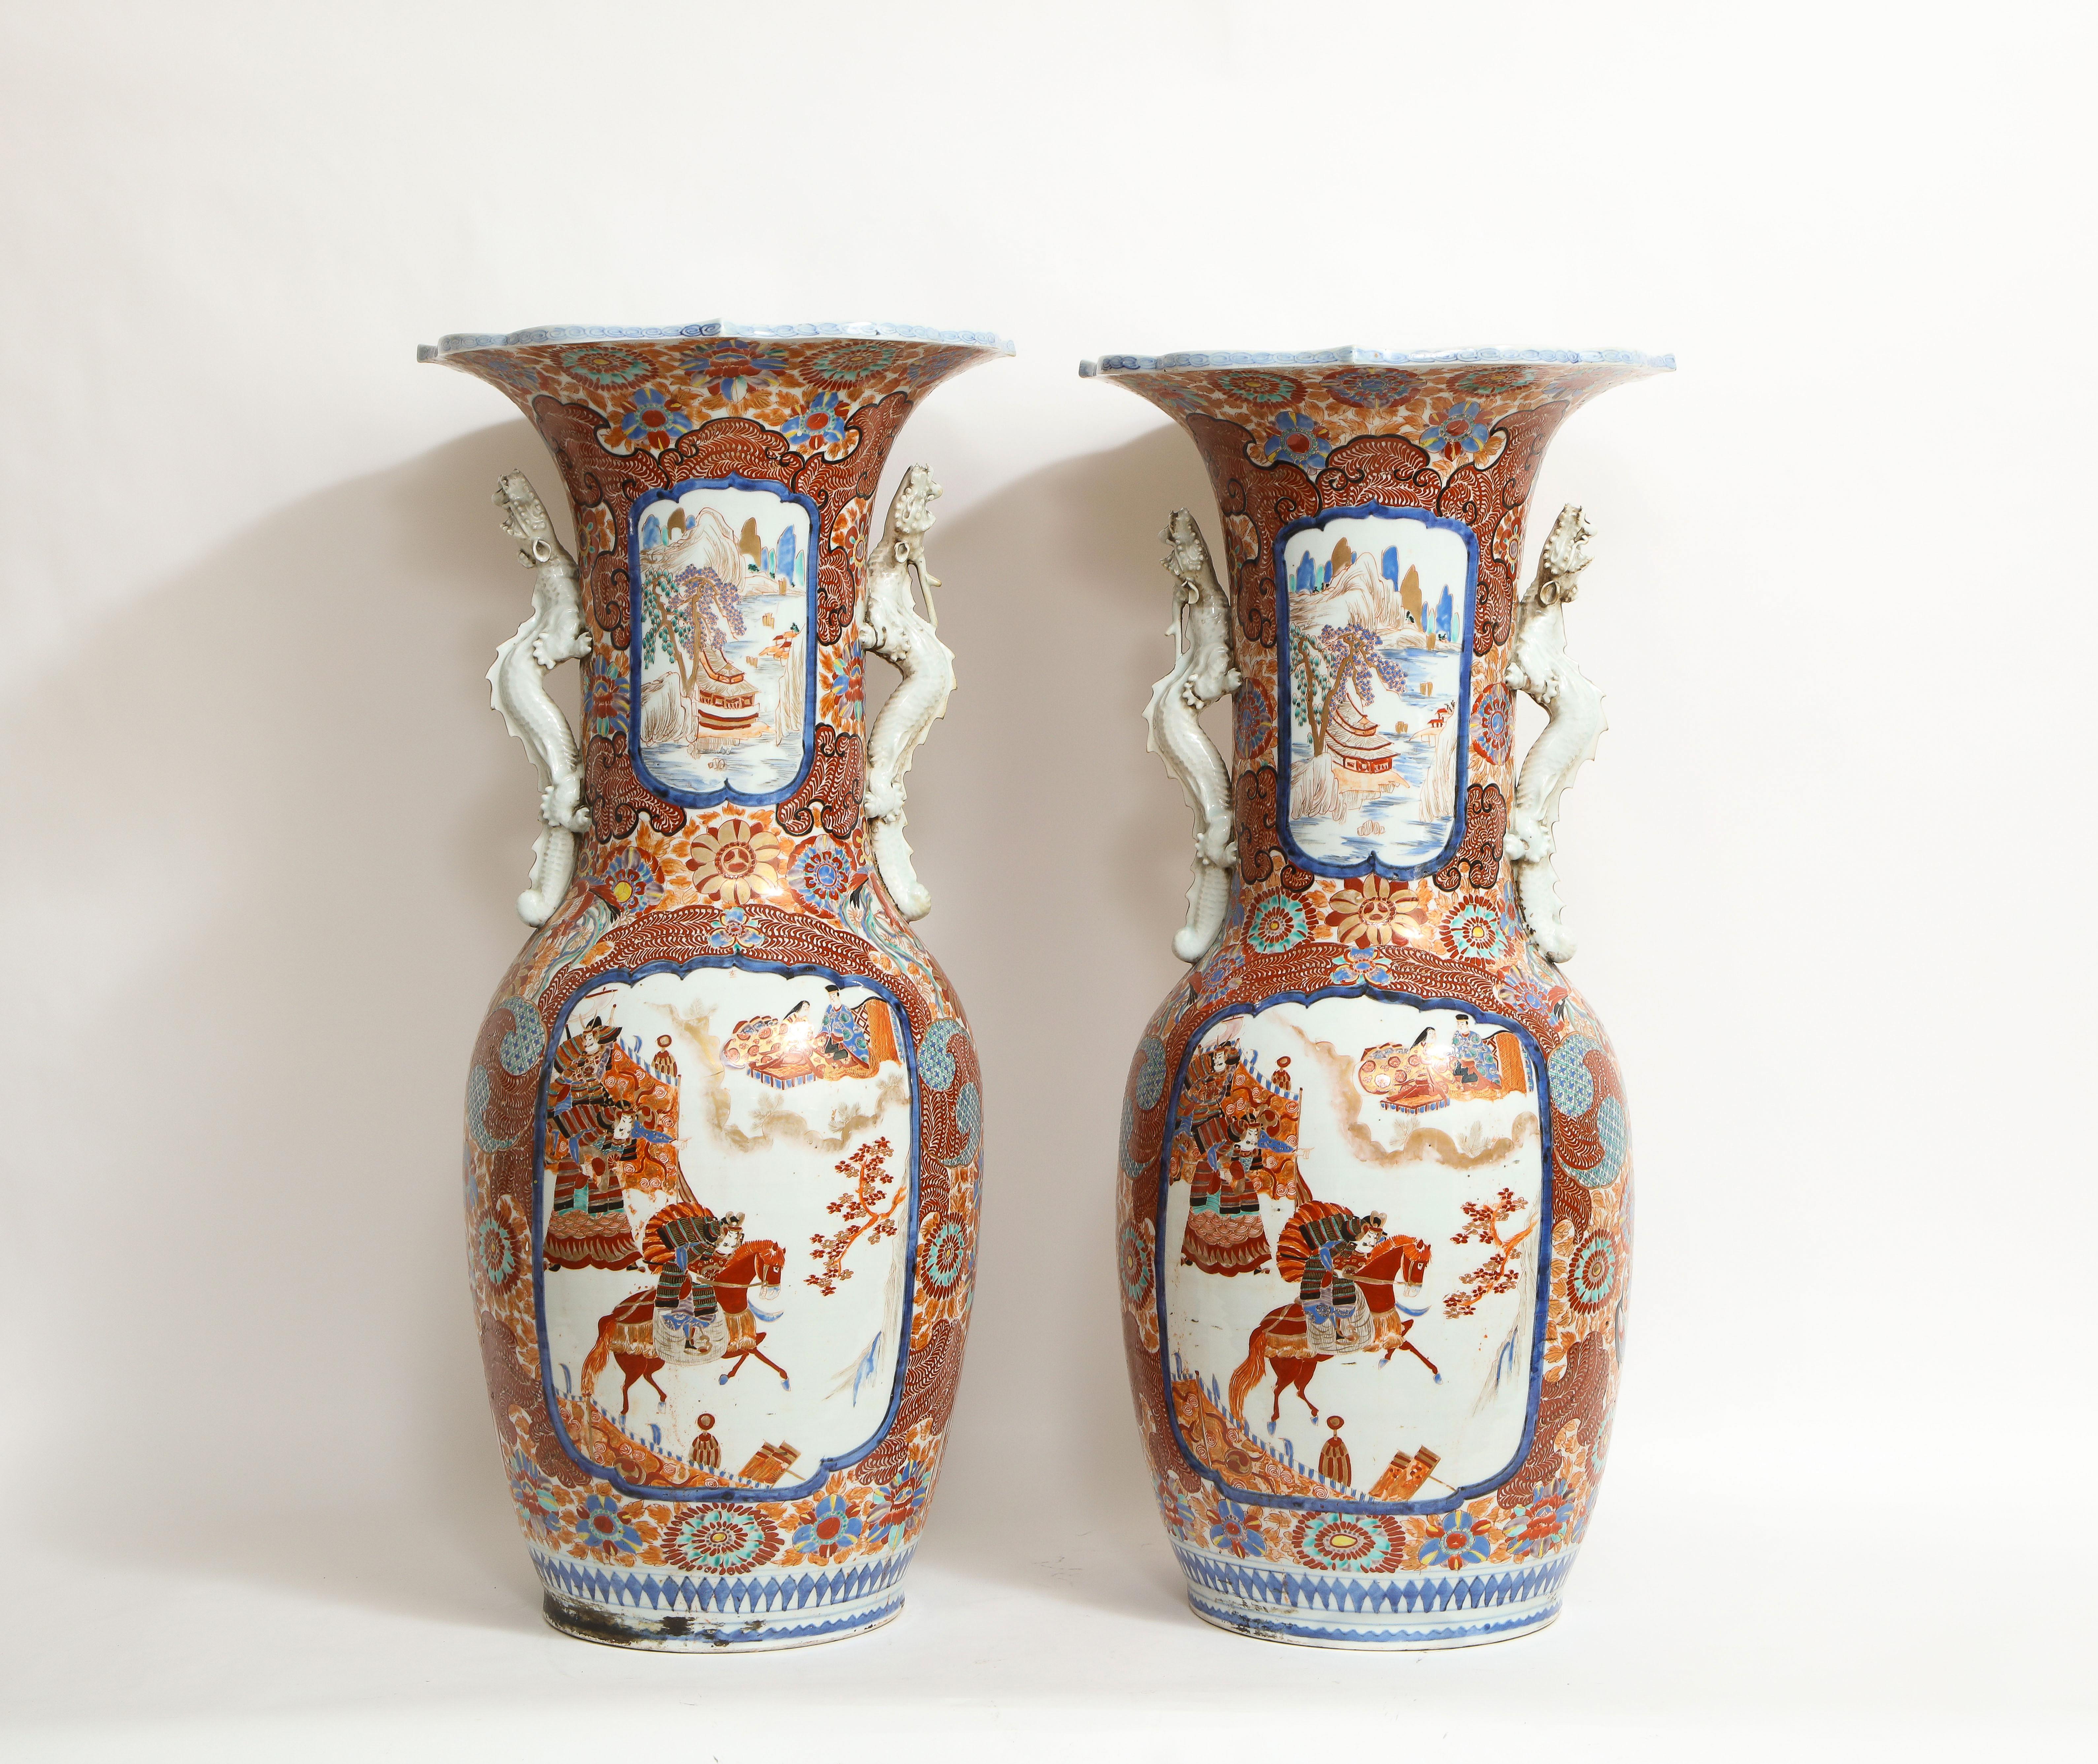 A Monumental pair of Japanese Meiji Period Imari vases with Dragon handles, Japanese Porcelain Studio Marks on Underside. Each is beautifully hand-painted with fantastic Imari decoration. The vases consist of panels of underglaze blue borders with